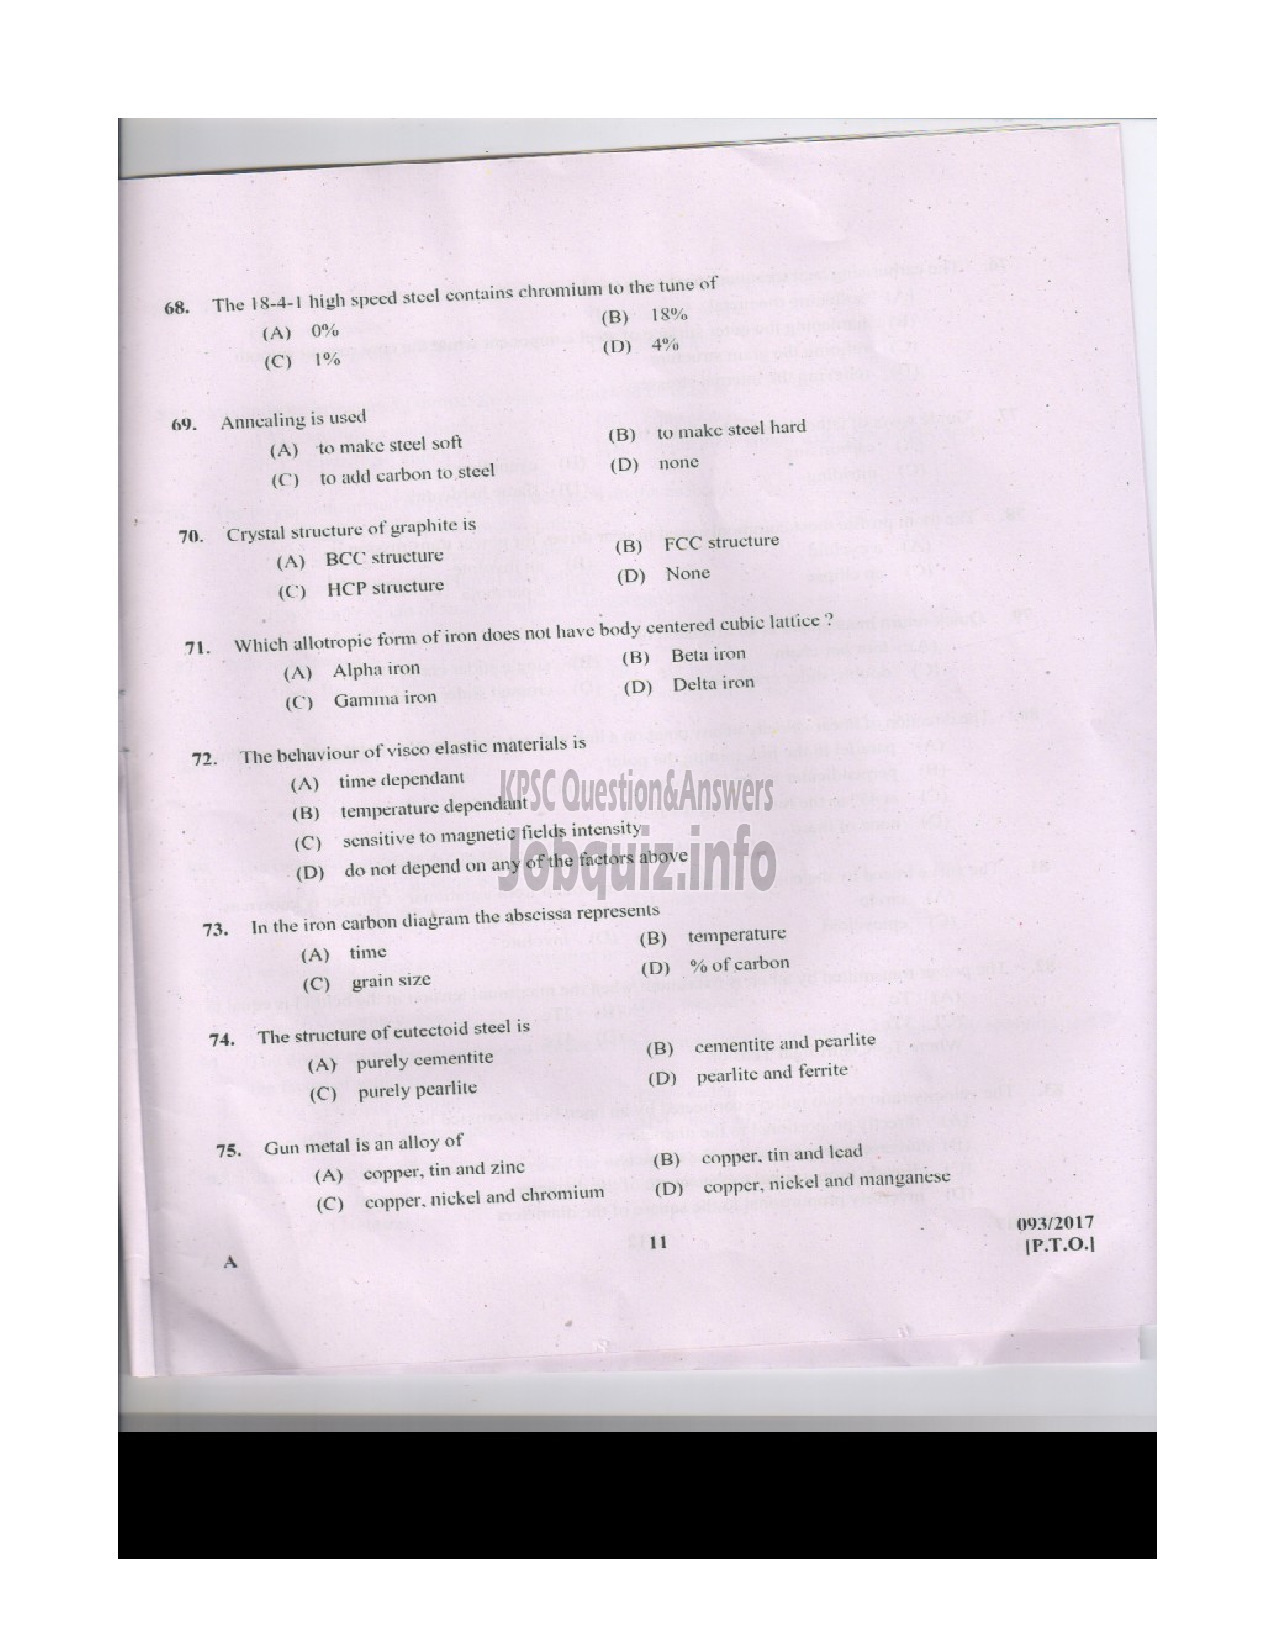 Kerala PSC Question Paper - INSTRUCTOR GRADE I MECHANICAL ENGINEERING ENGINEERING COLLEGES-10